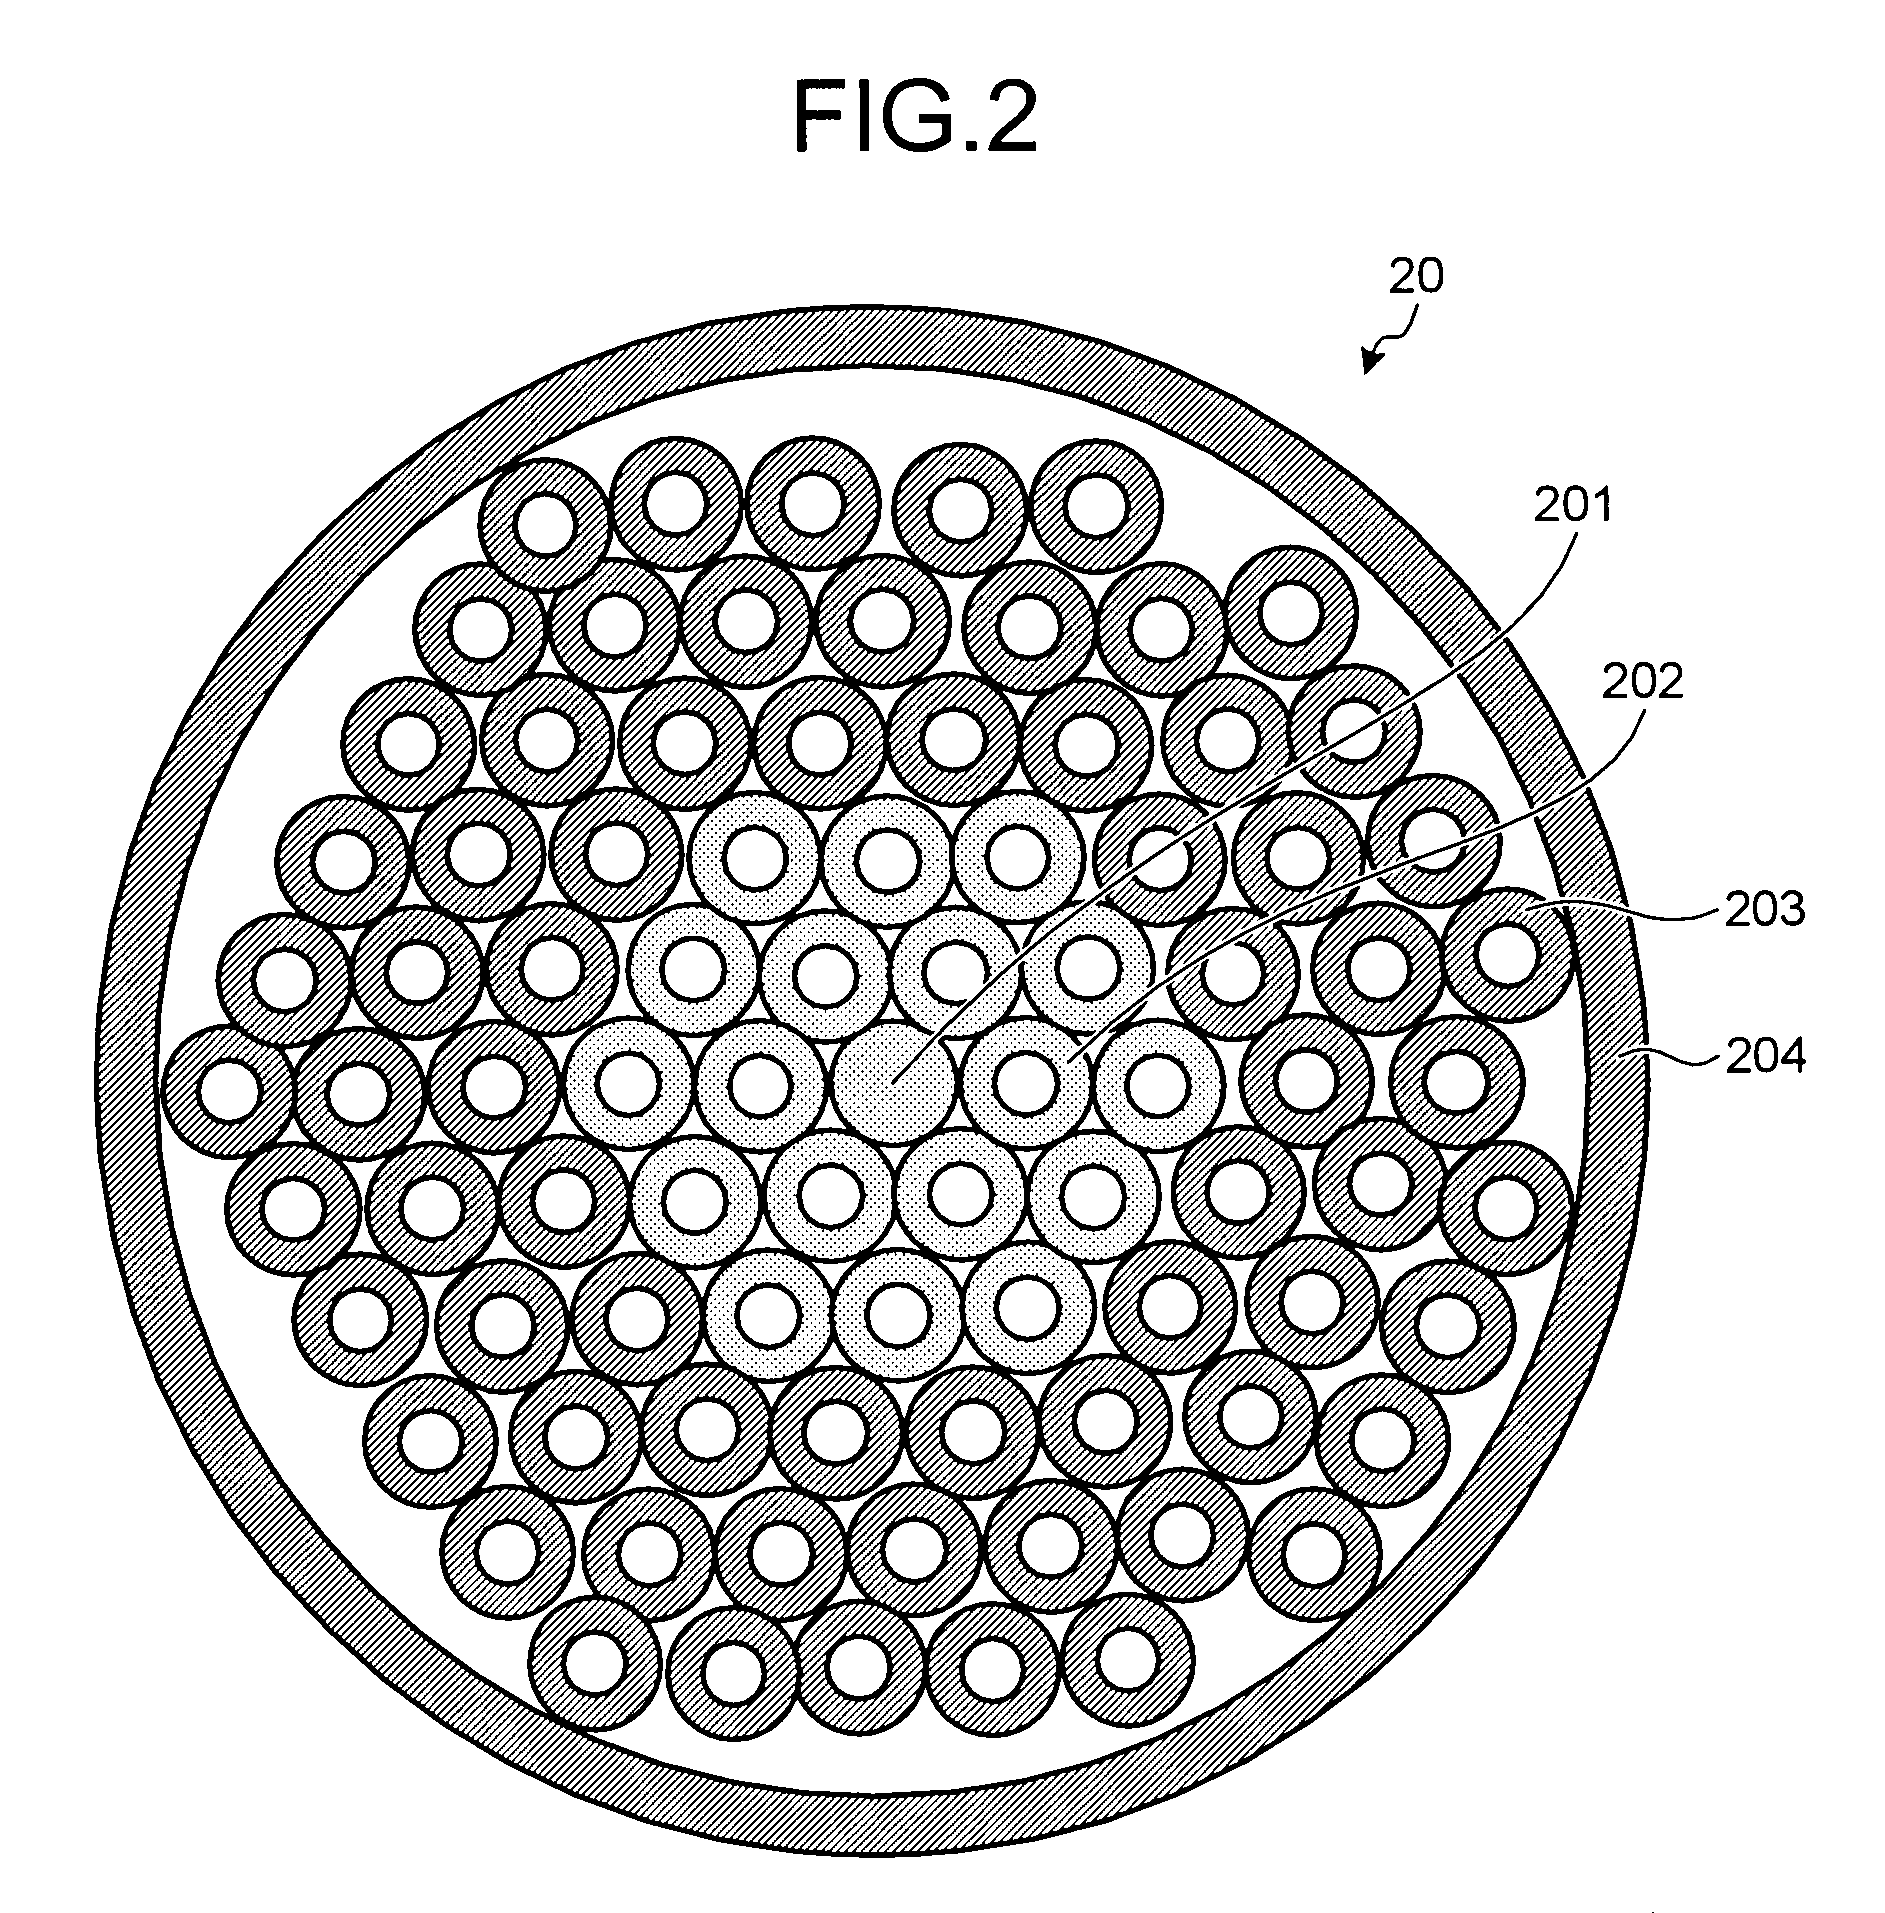 Holey fiber and method of manufacturing the same